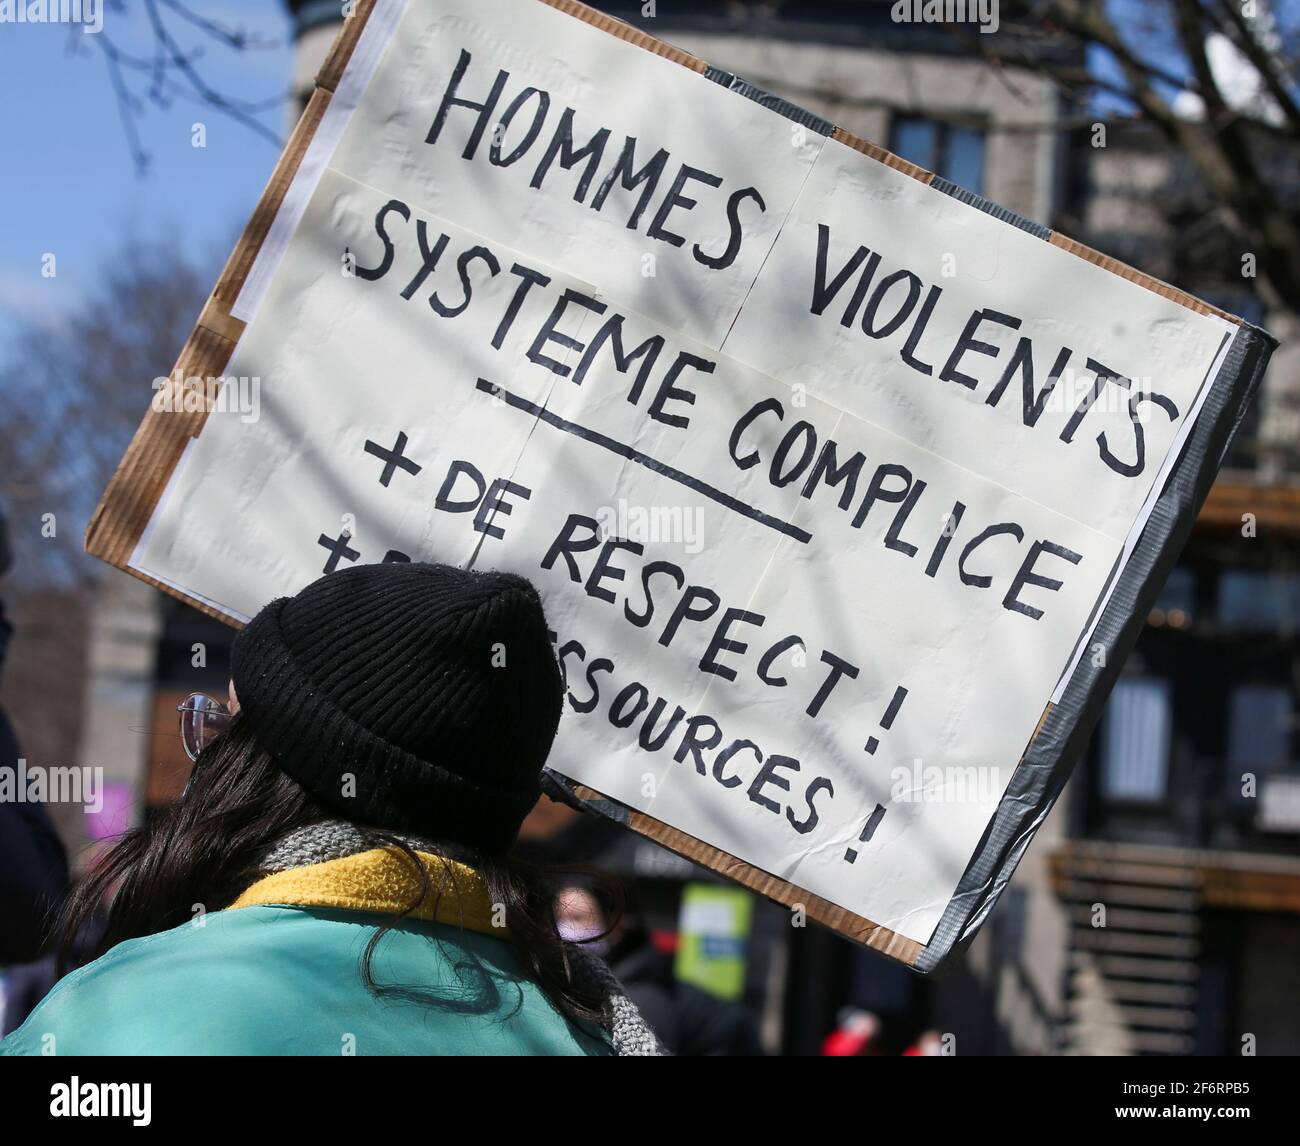 A woman carries a sign reading 'Violent men, complicit system, add respect and resources' during  a march in protest against domestic violence, after several women in the province were killed in recent weeks, in Montreal, Quebec, Canada April 2, 2021.   REUTERS/Christinne Muschi Stock Photo